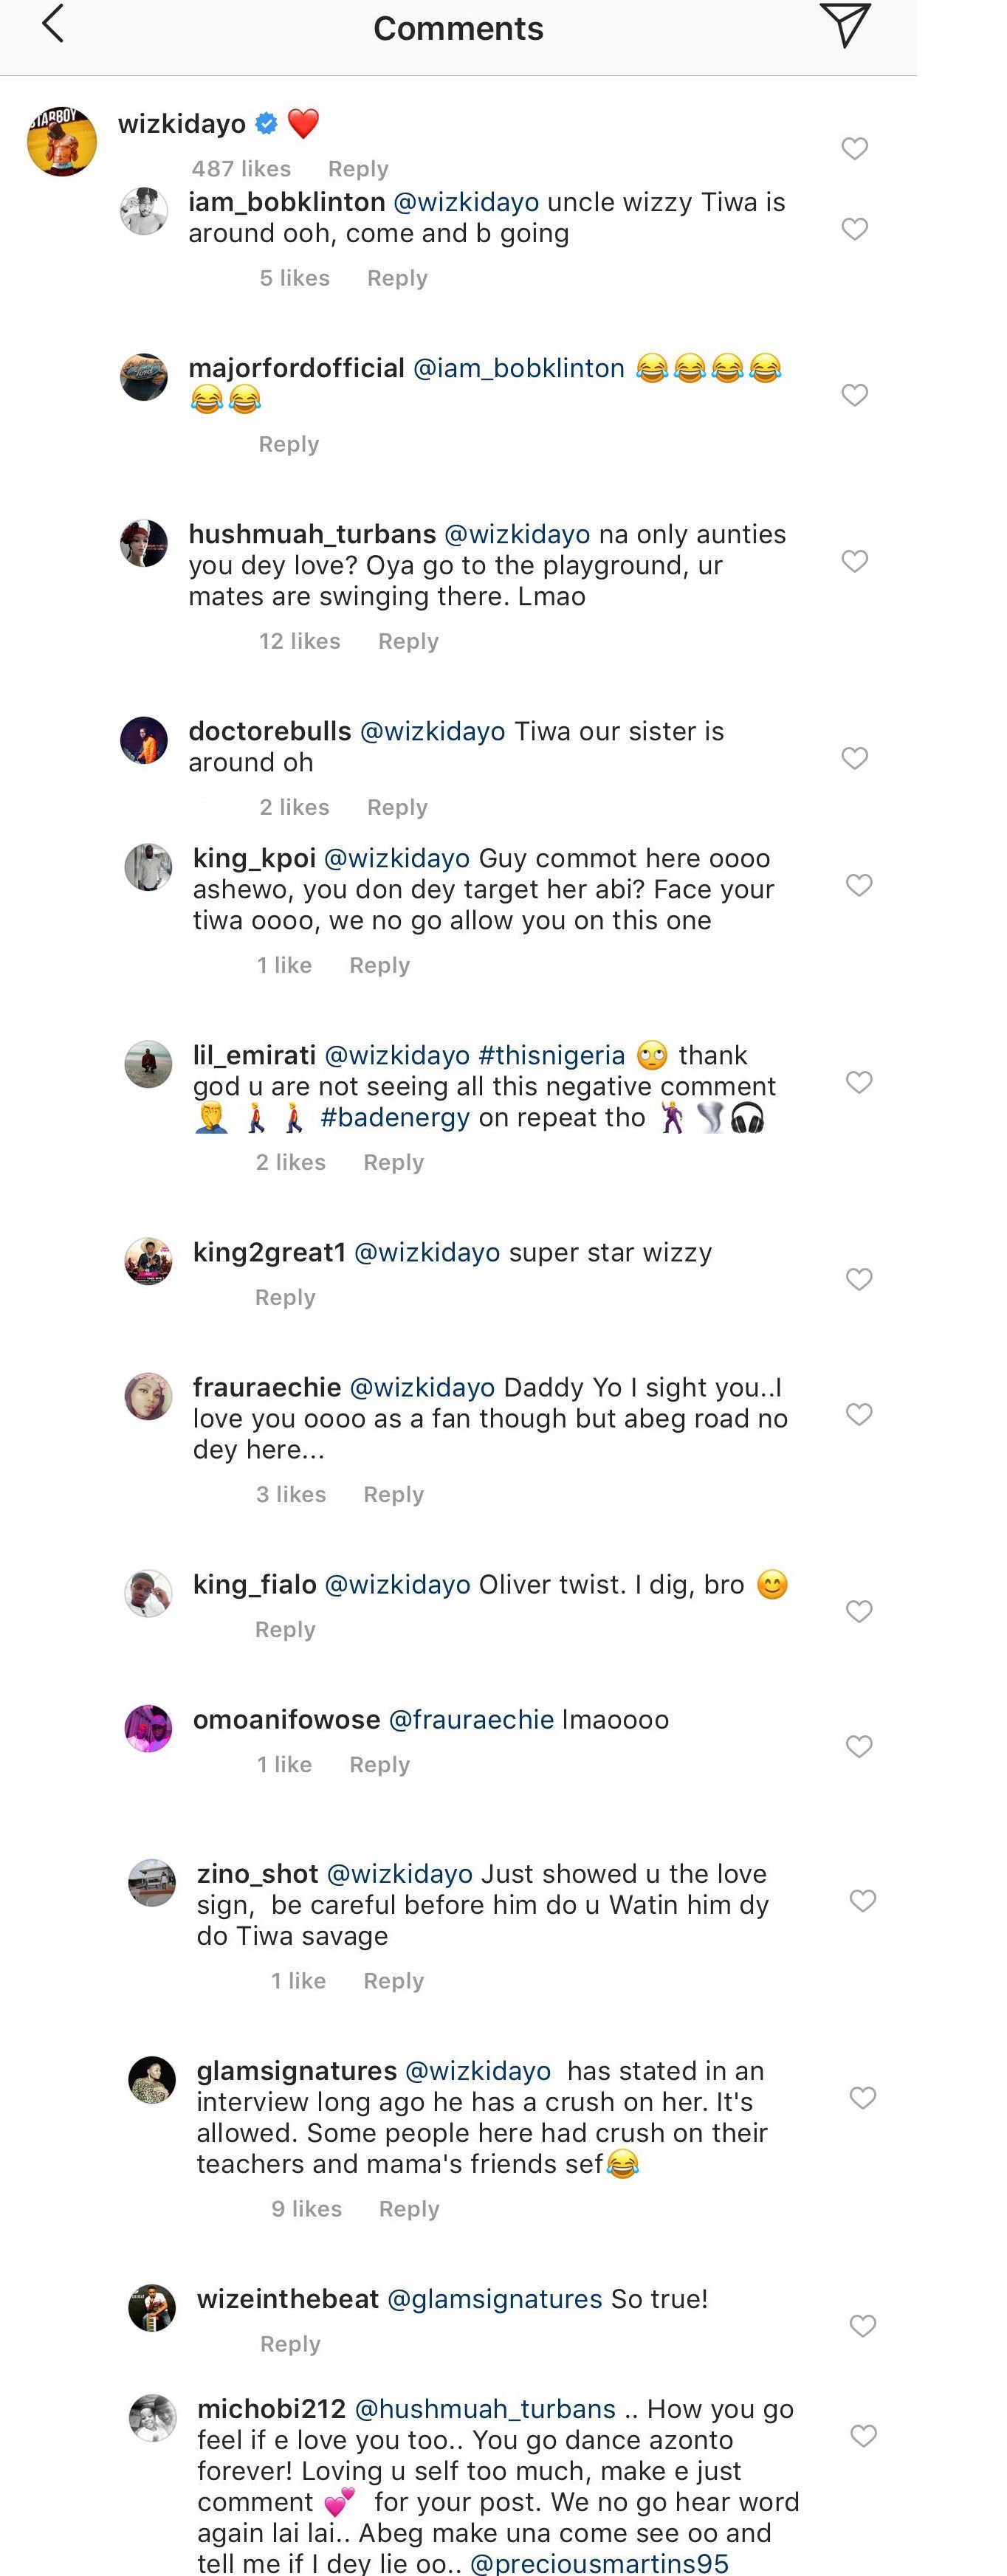 Fans drag Wizkid over his comment on Genevieve Nnaji's photo